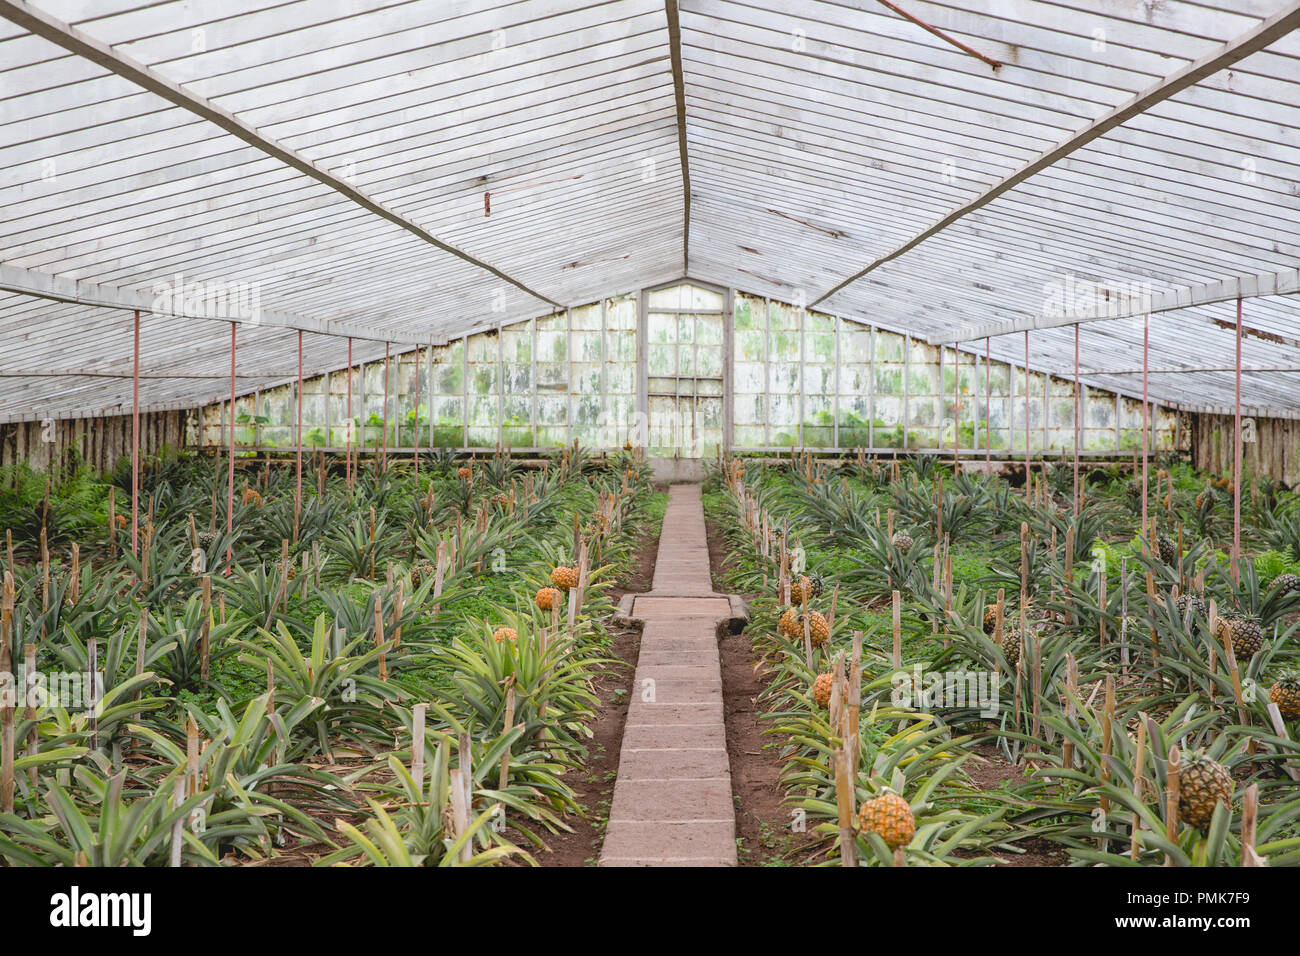 Pineapples (ananas) growing in rows on the Arruda Pineapple Plantation on the island of Sao Miguel in the Azores Stock Photo